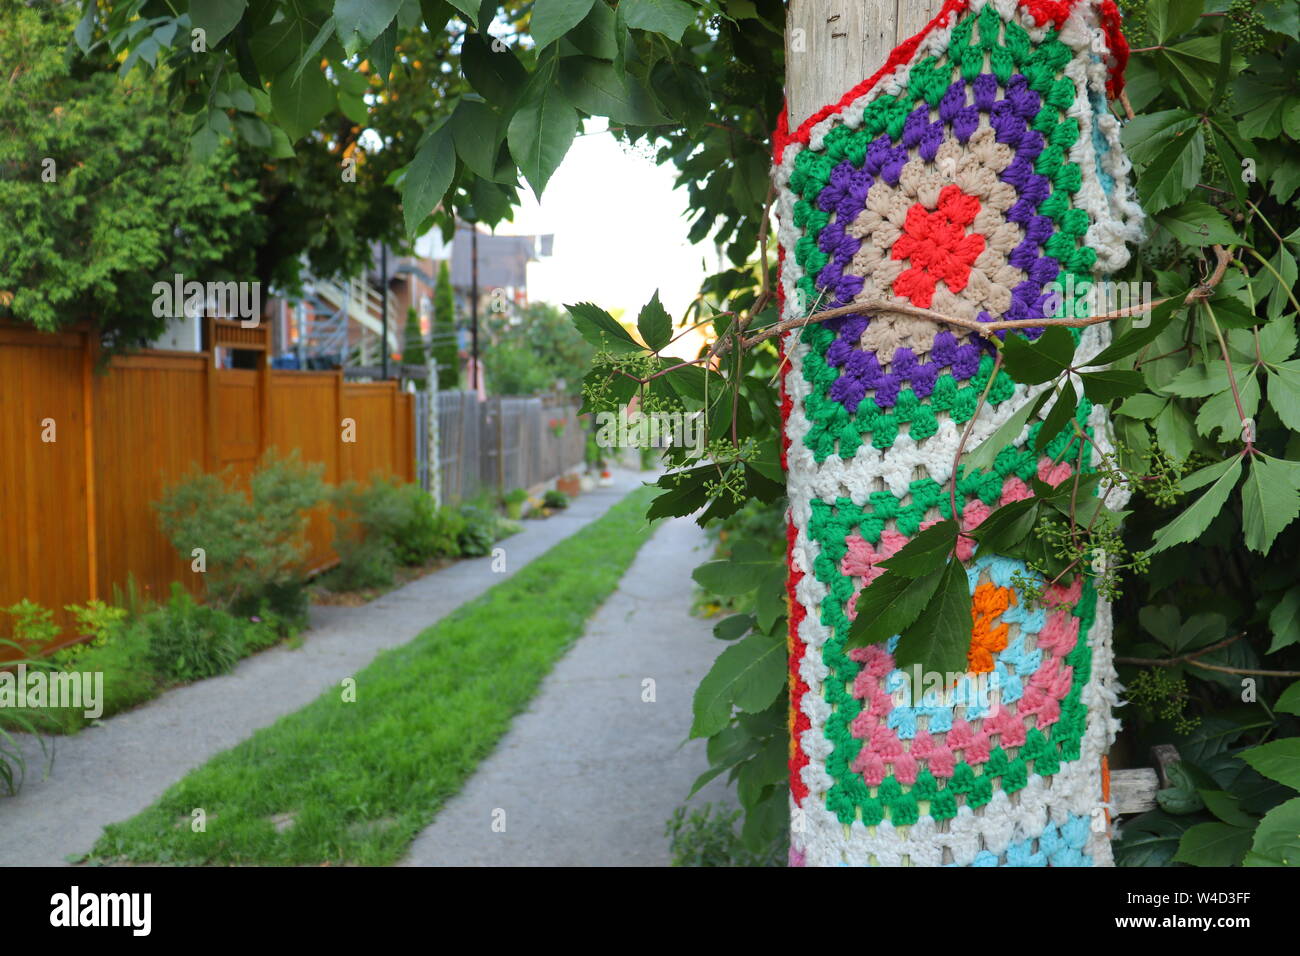 Yarn Bombing in a Green Alley, Knitted Decoration, Montreal Stock Photo